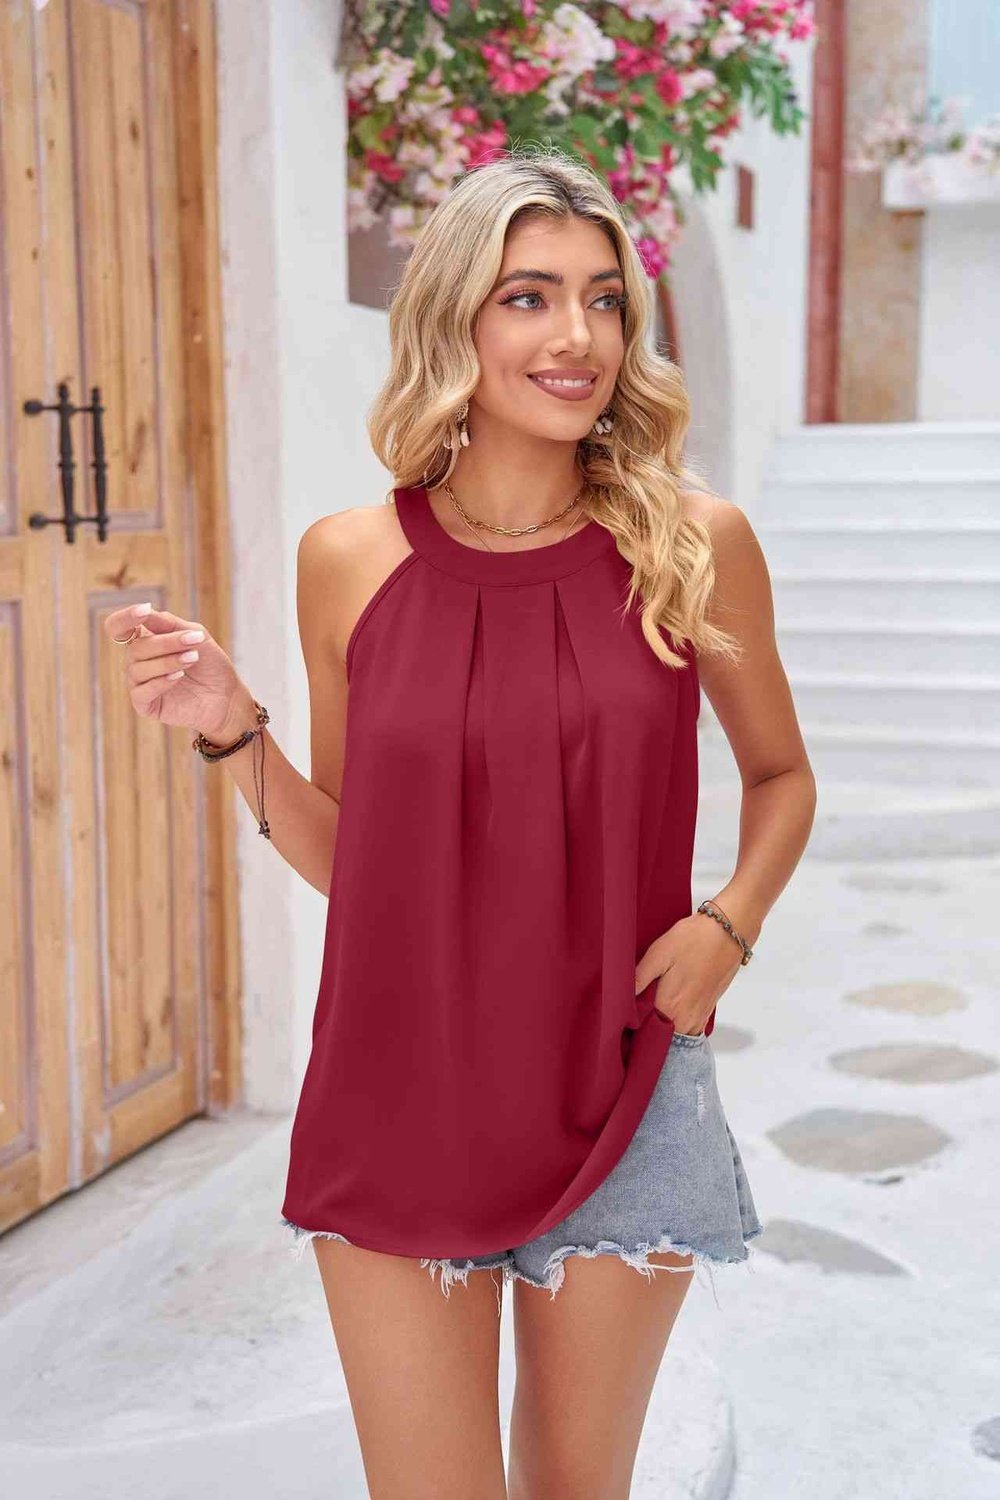 Grecian Neck Sleeveless Top - Blouses - FITGGINS